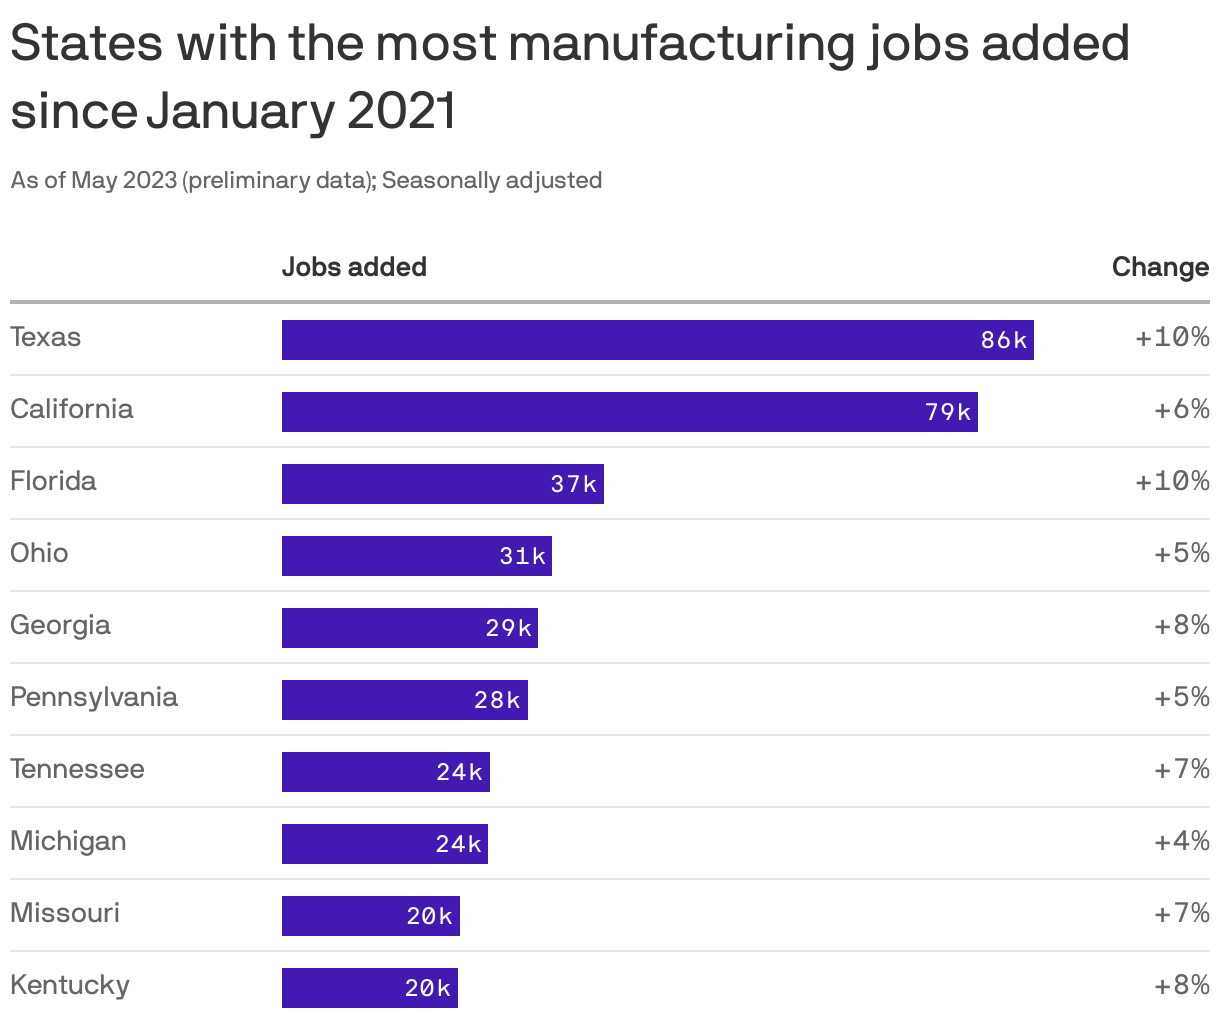 States with the most manufacturing jobs added since January 2021